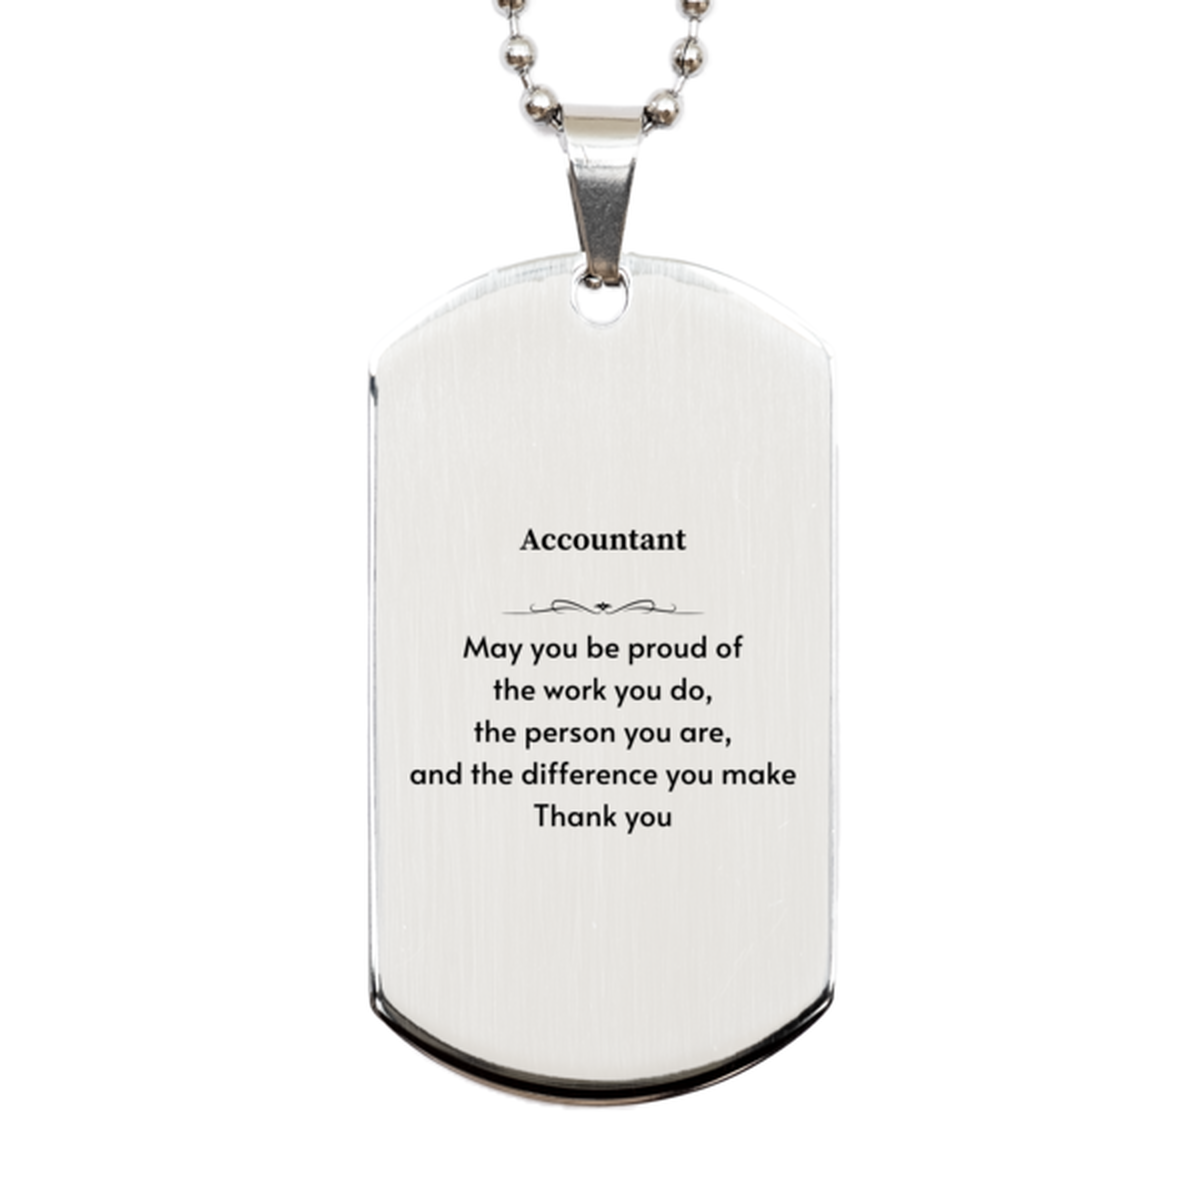 Heartwarming Silver Dog Tag Retirement Coworkers Gifts for Accountant, Accountant May You be proud of the work you do, the person you are Gifts for Boss Men Women Friends